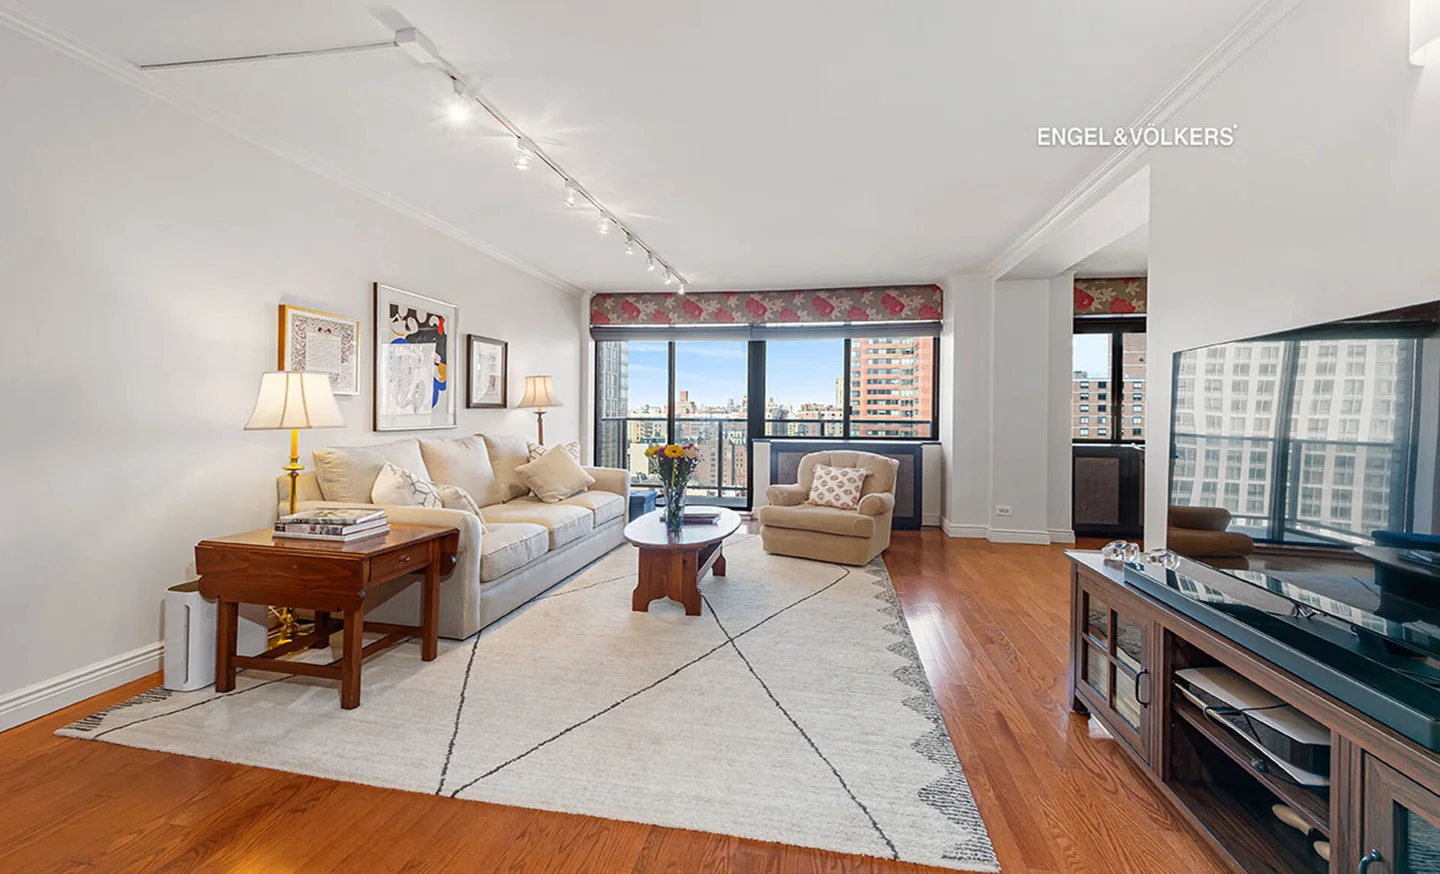 Beautiful 2-Bedroom Perched High Above the City